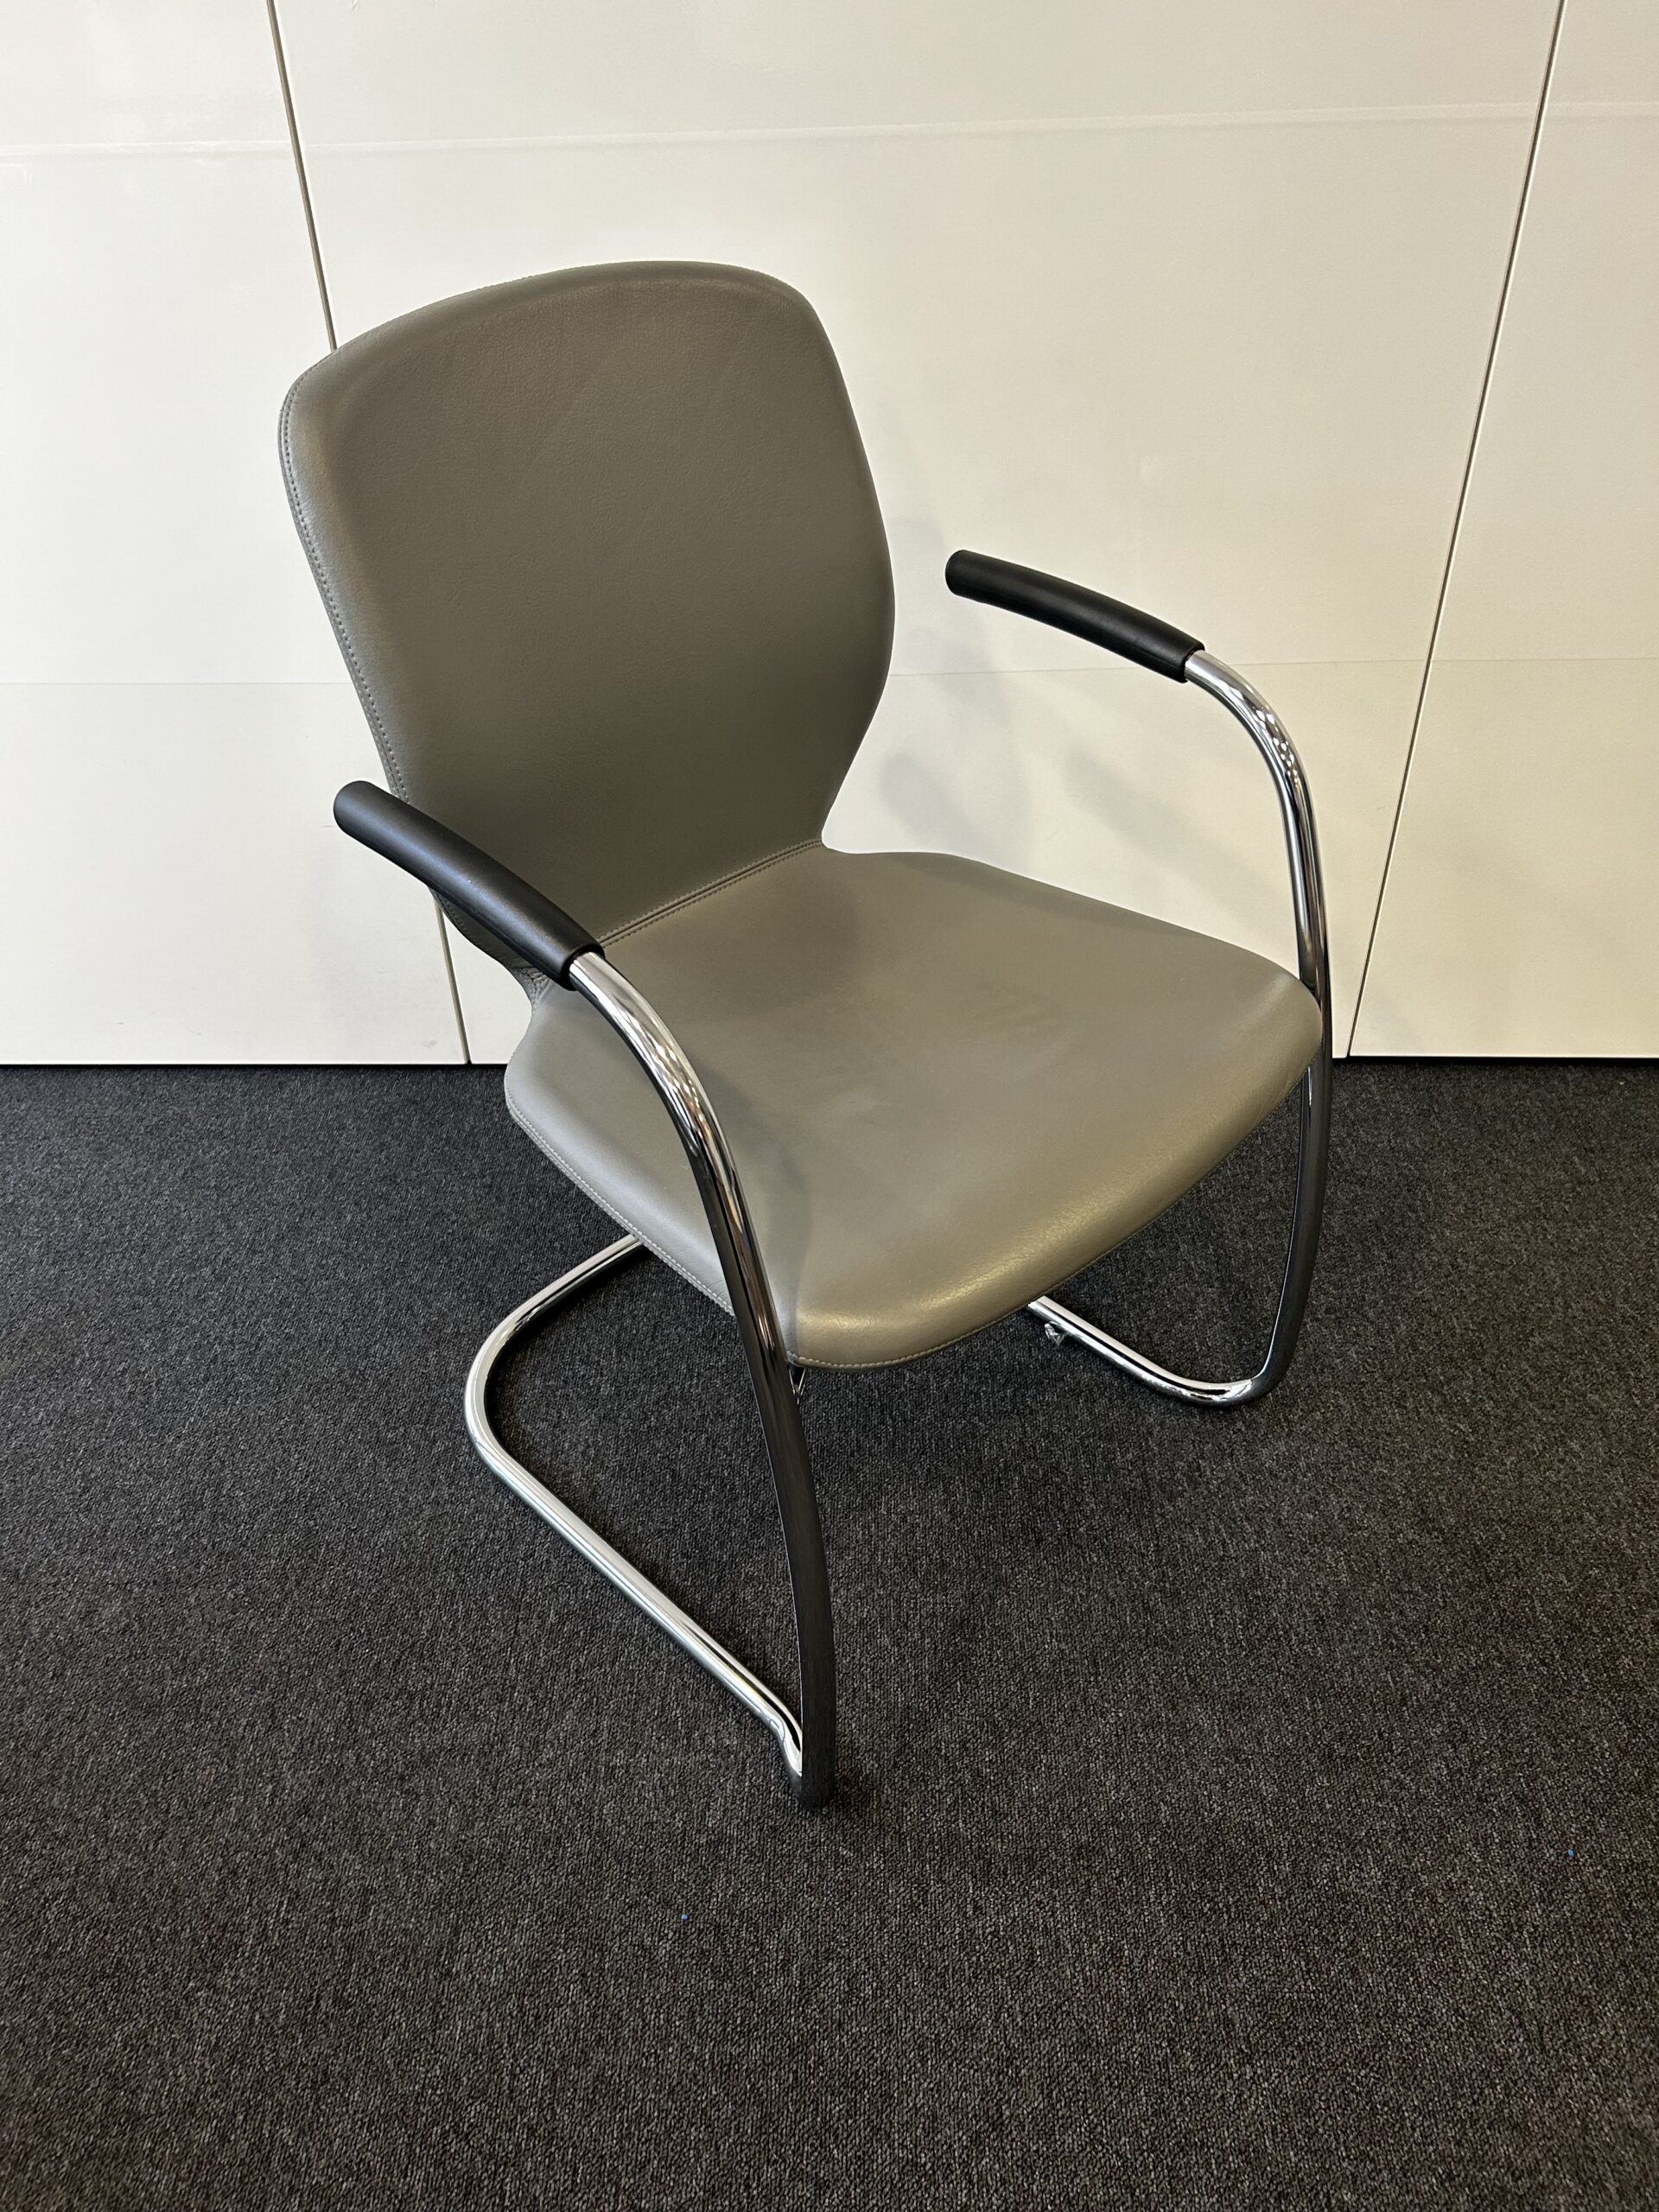 Boss Design Lily stacking conference Chair in Camira Blazer Ulster Green fabric